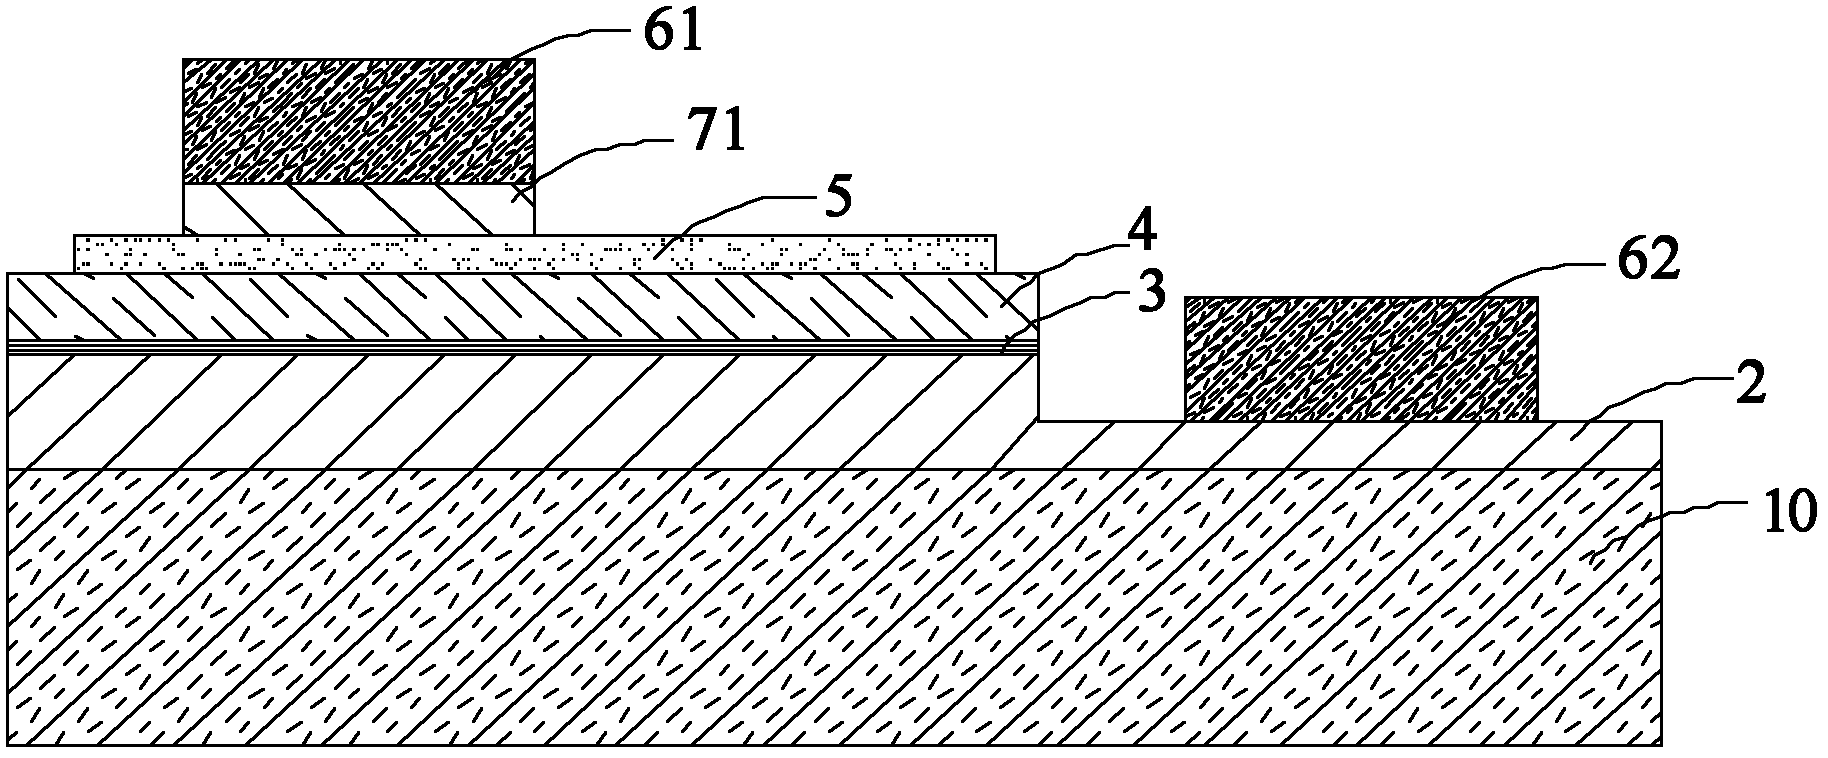 Semiconductor light emitting diode (LED) device and formation method thereof